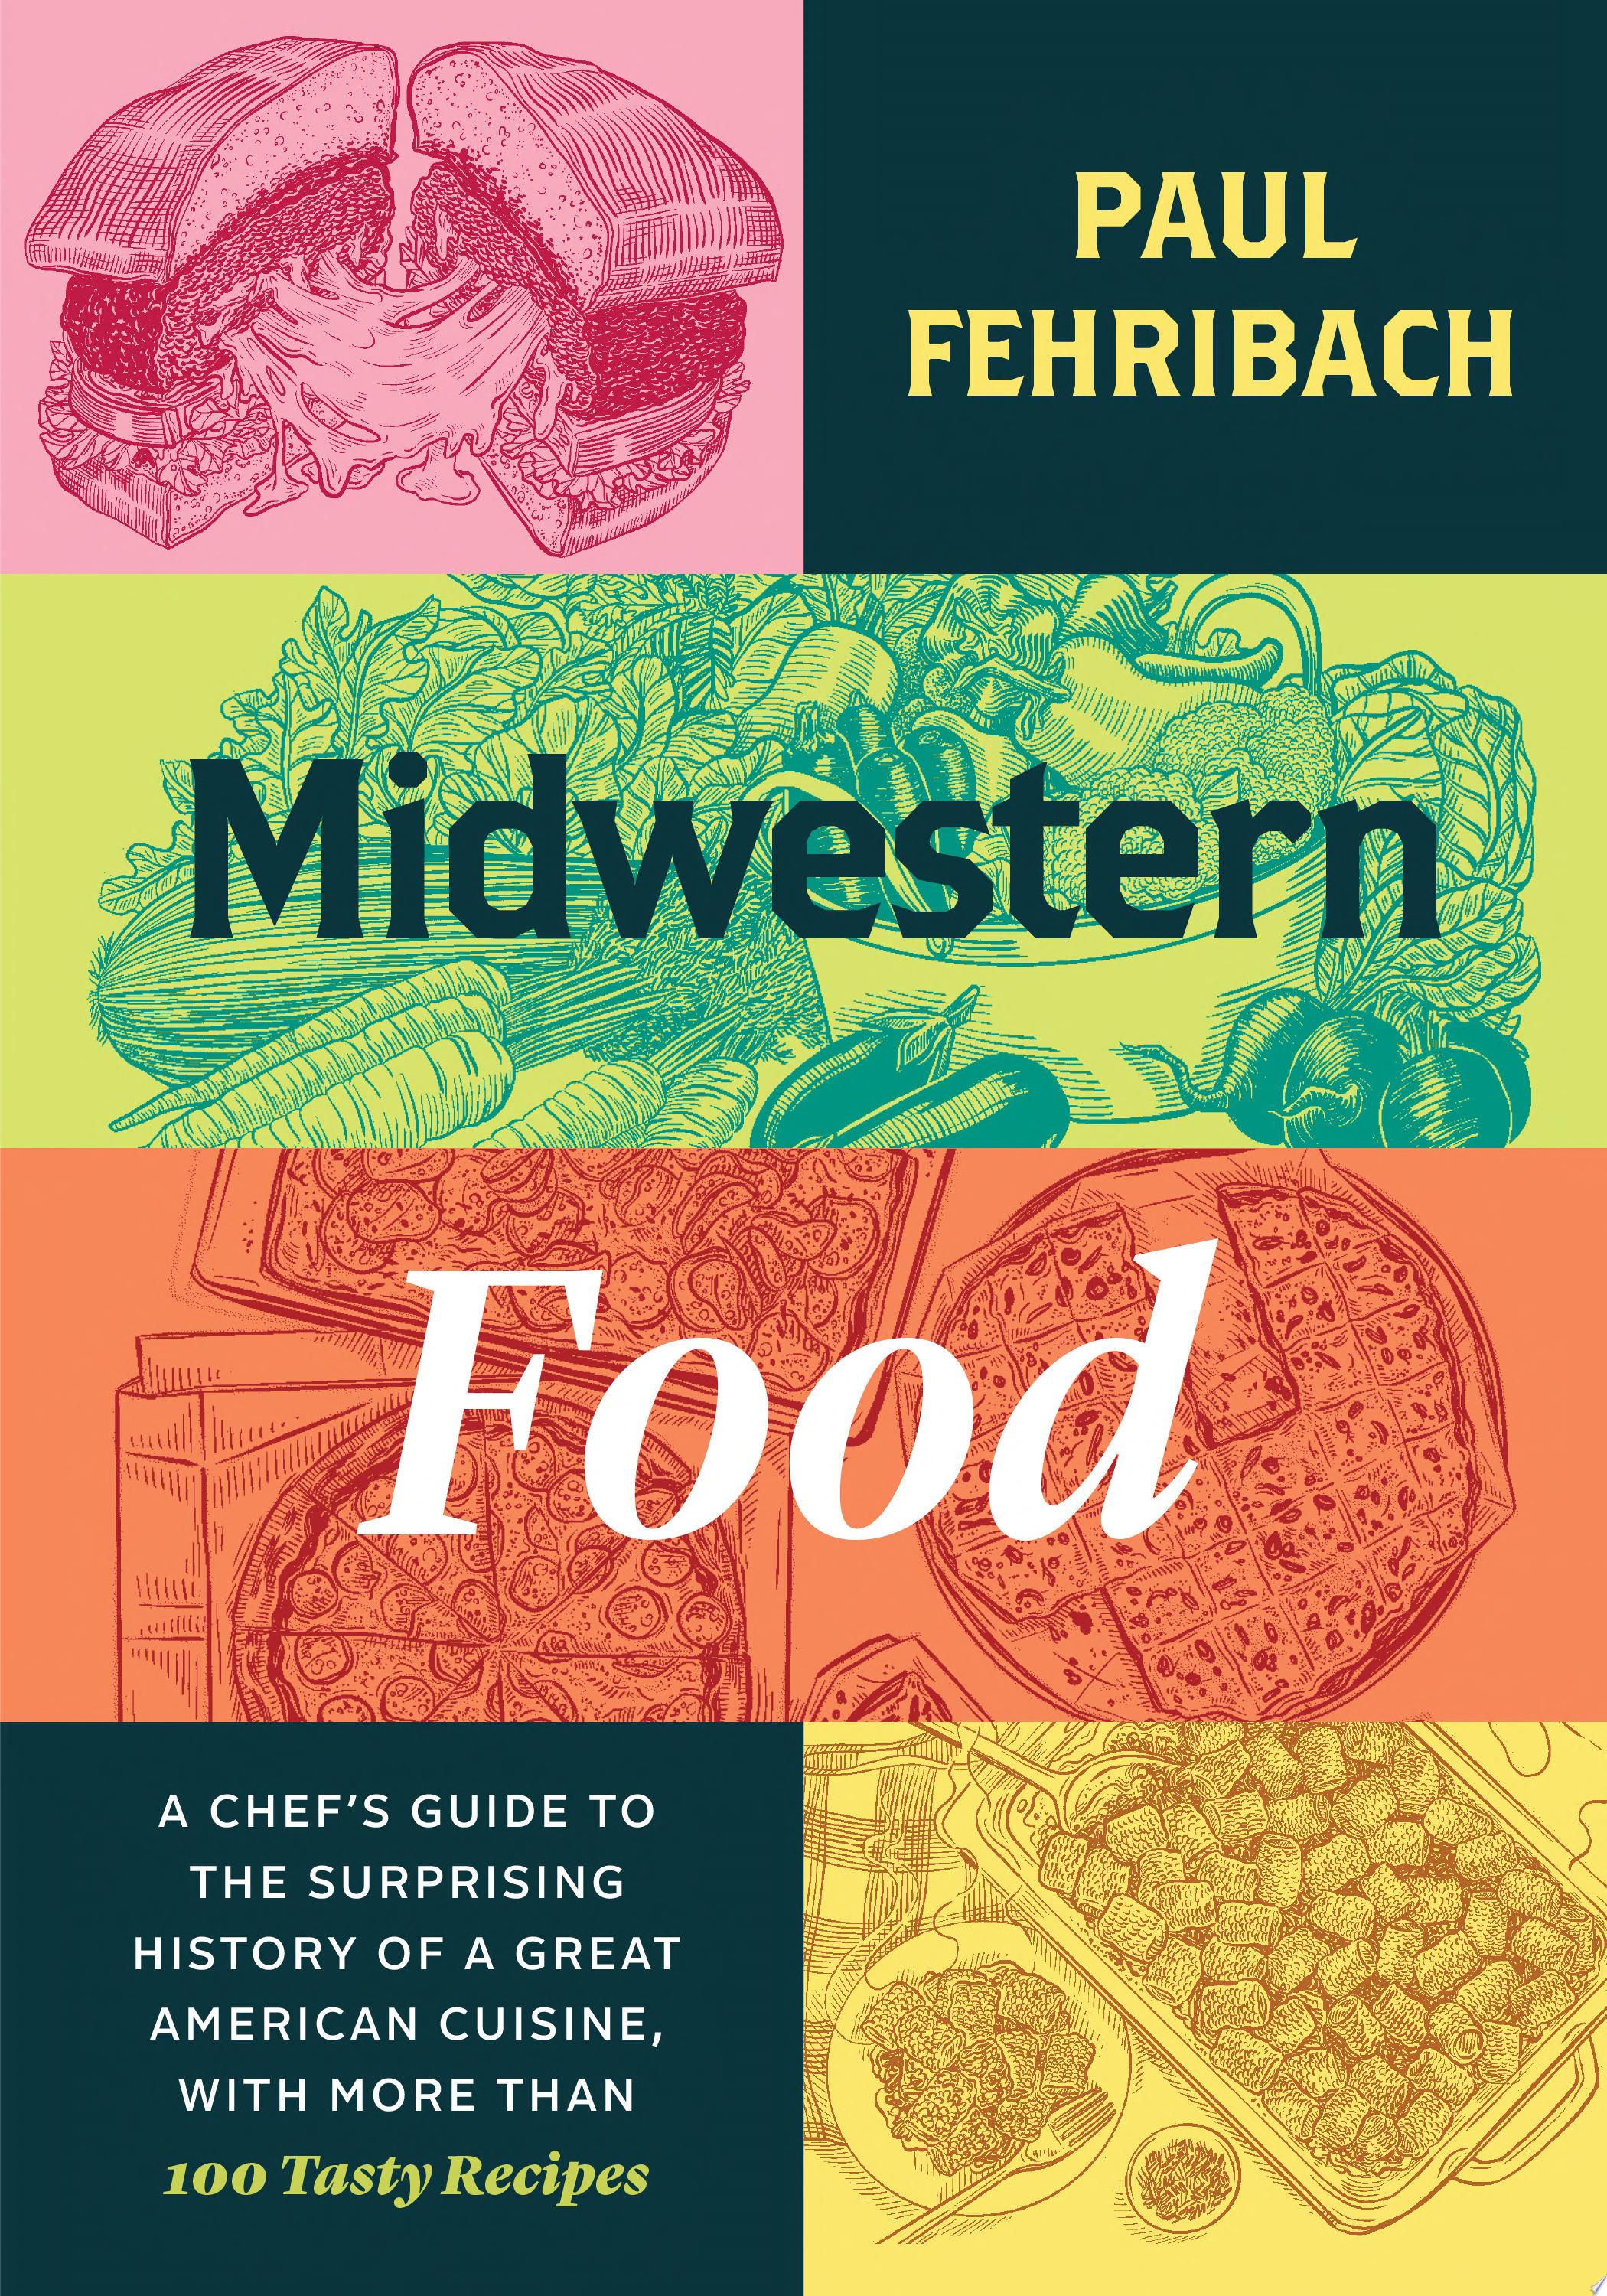 Image for "Midwestern Food"